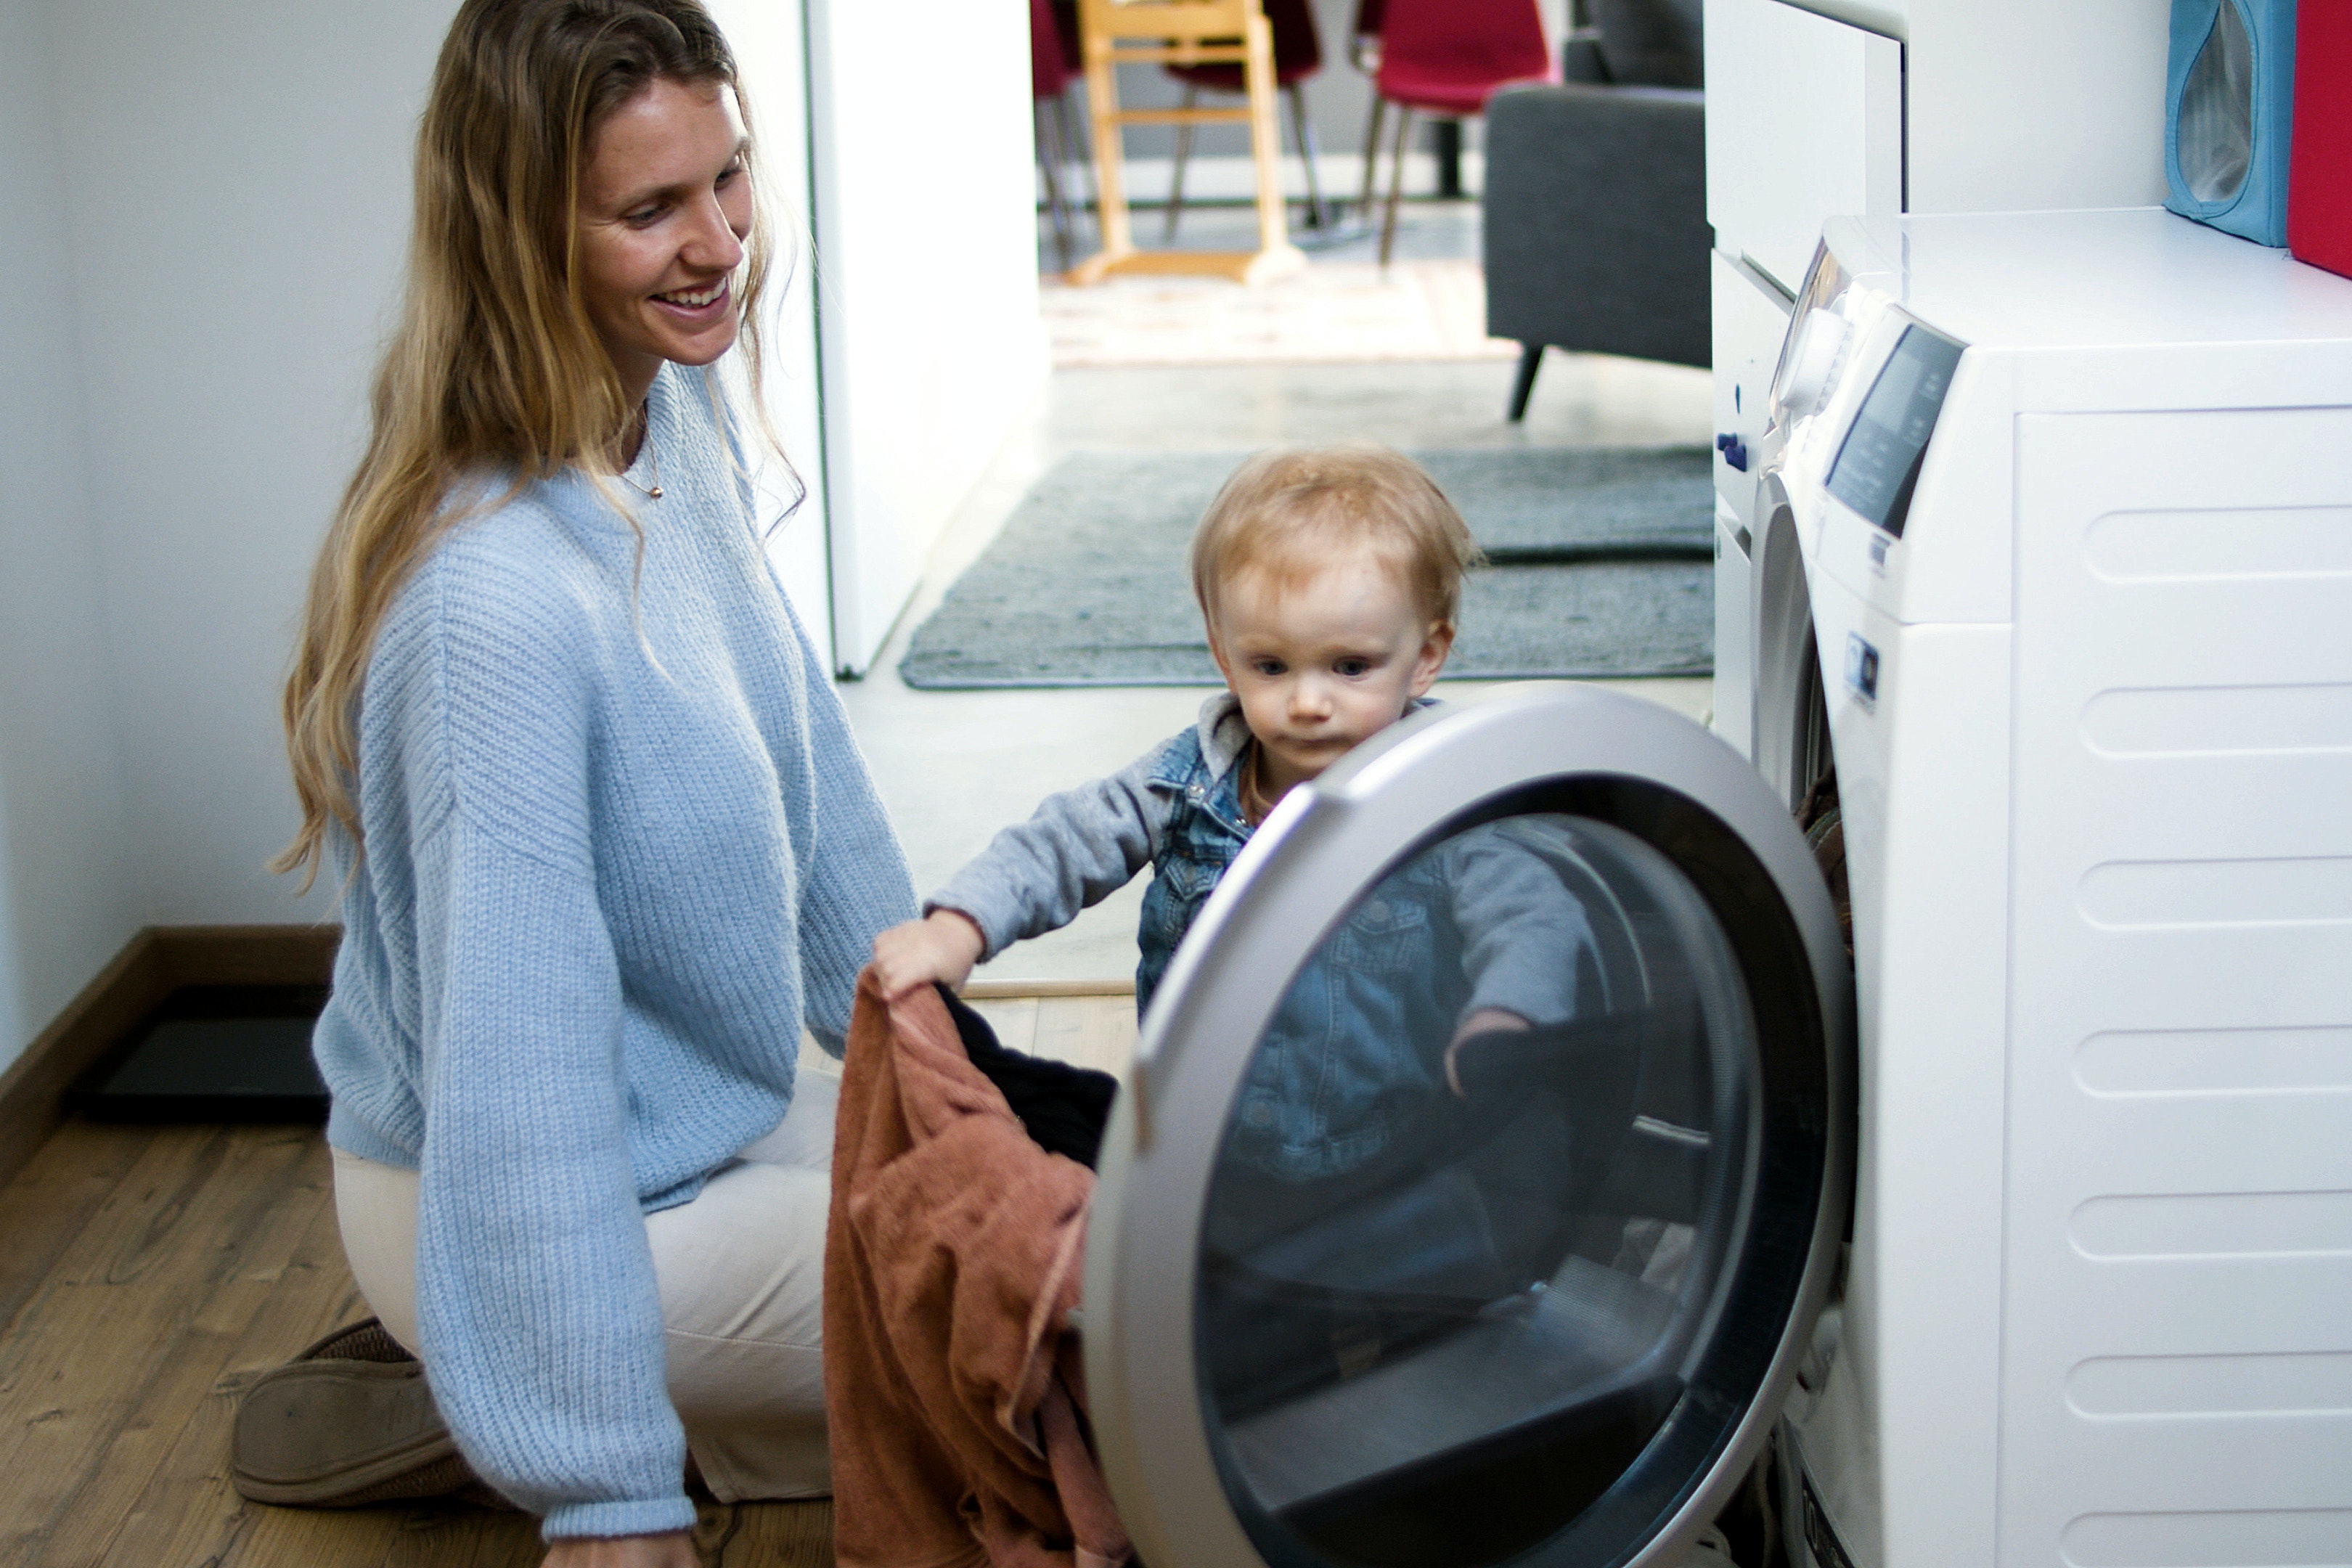 Glasgow families to receive help with the cost of white goods thanks to new scheme